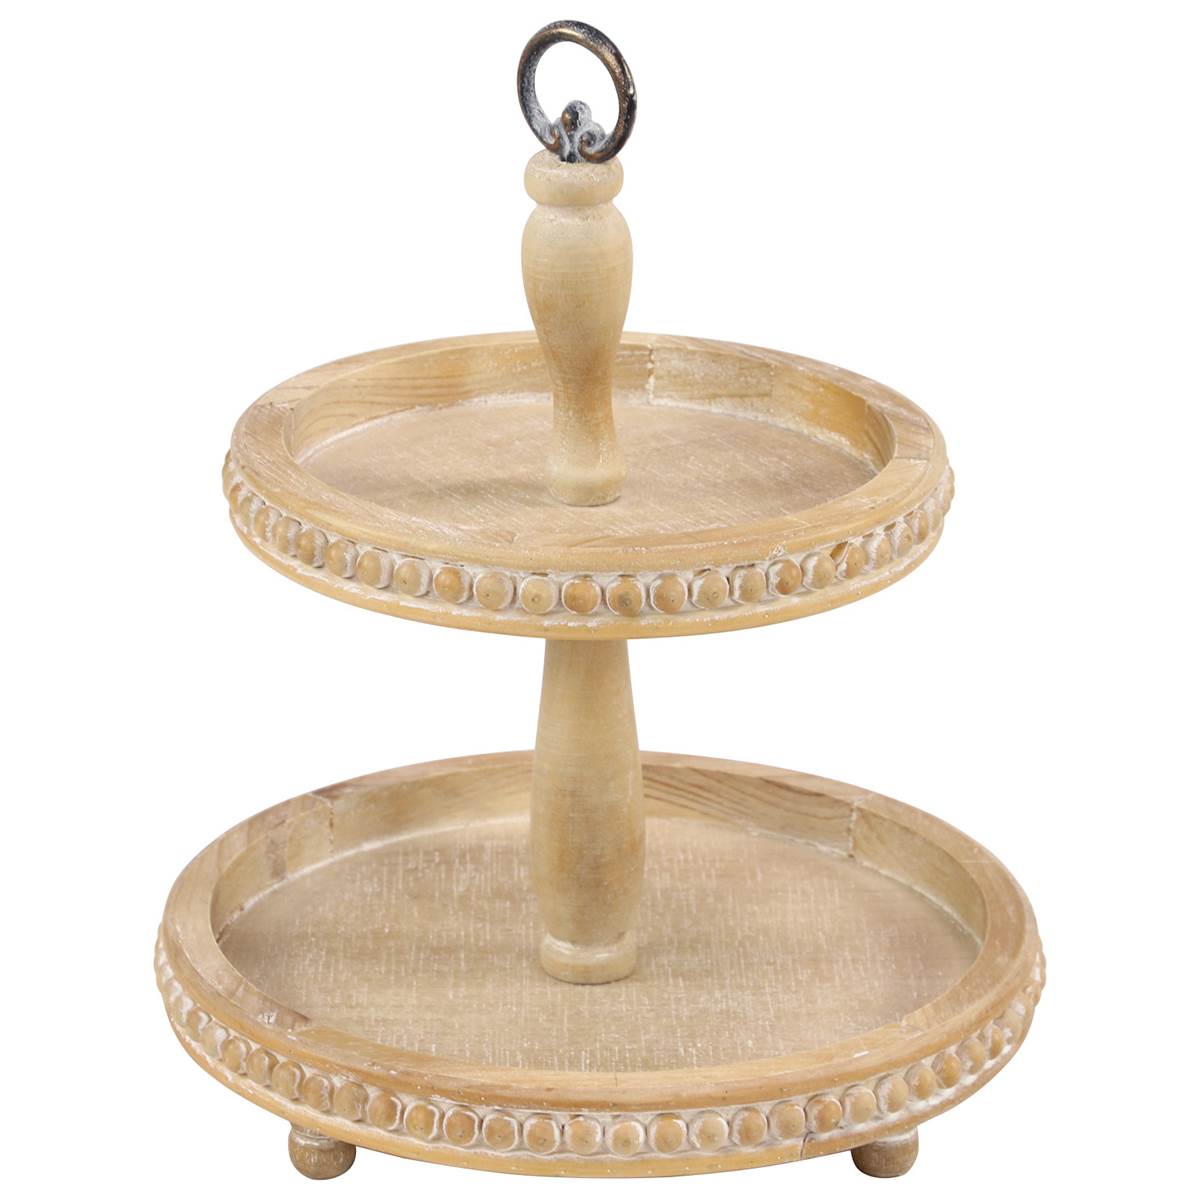 9th & Pike(R) Natural Beige Wood 2-Tier Round Serving Tray Stand